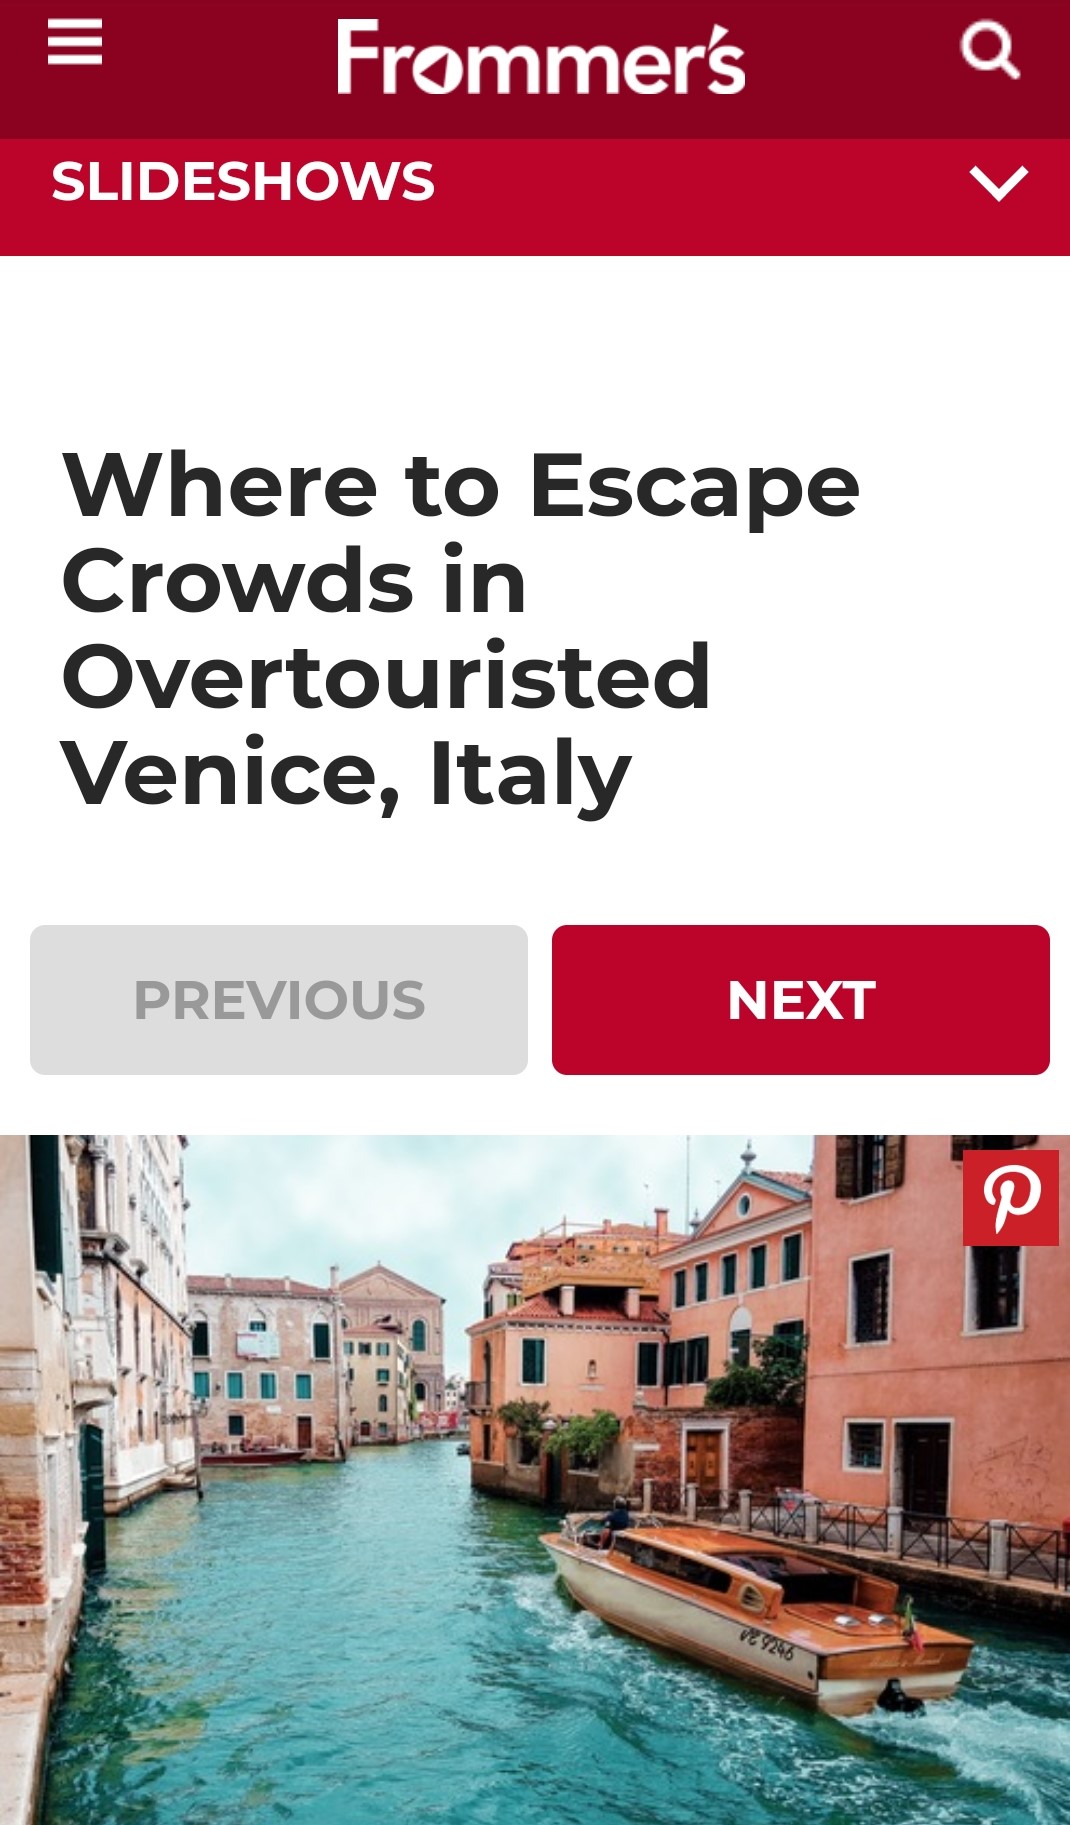 Frommer’s: Where to Escape Crowds in Overtouristed Venice, Italy